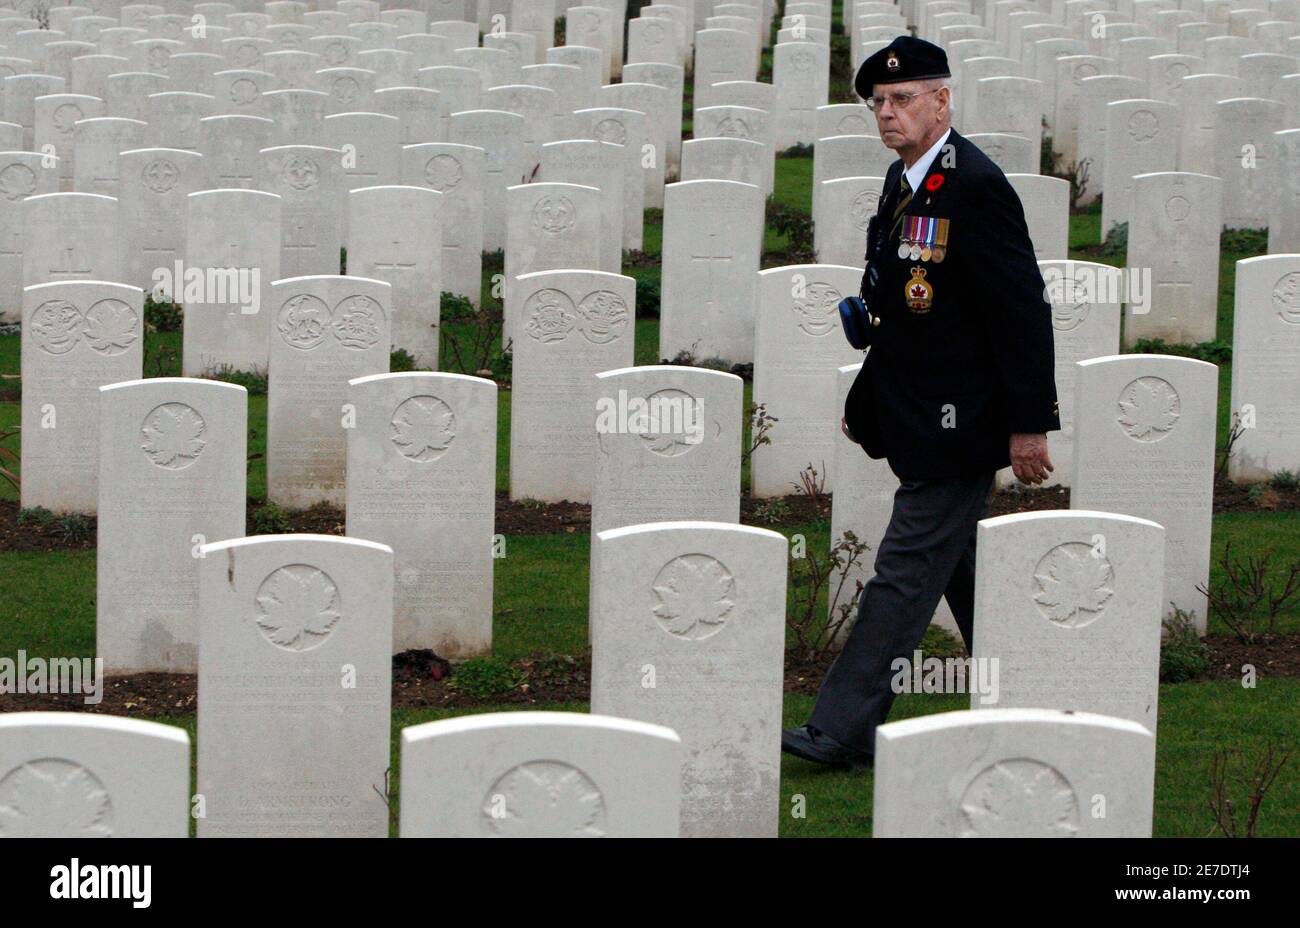 Canadian Second World War veteran John Henderson, of Carnduff, Saskatchewan, tours the Vis-en-Artois British Cemetery in Vis-en-Artois, France November 10, 2008. A group of Canadian veterans is travelling through France and Belgium to commemorate the 90th anniversary of the end of the First World War.       REUTERS/Chris Wattie       (FRANCE) Stock Photo